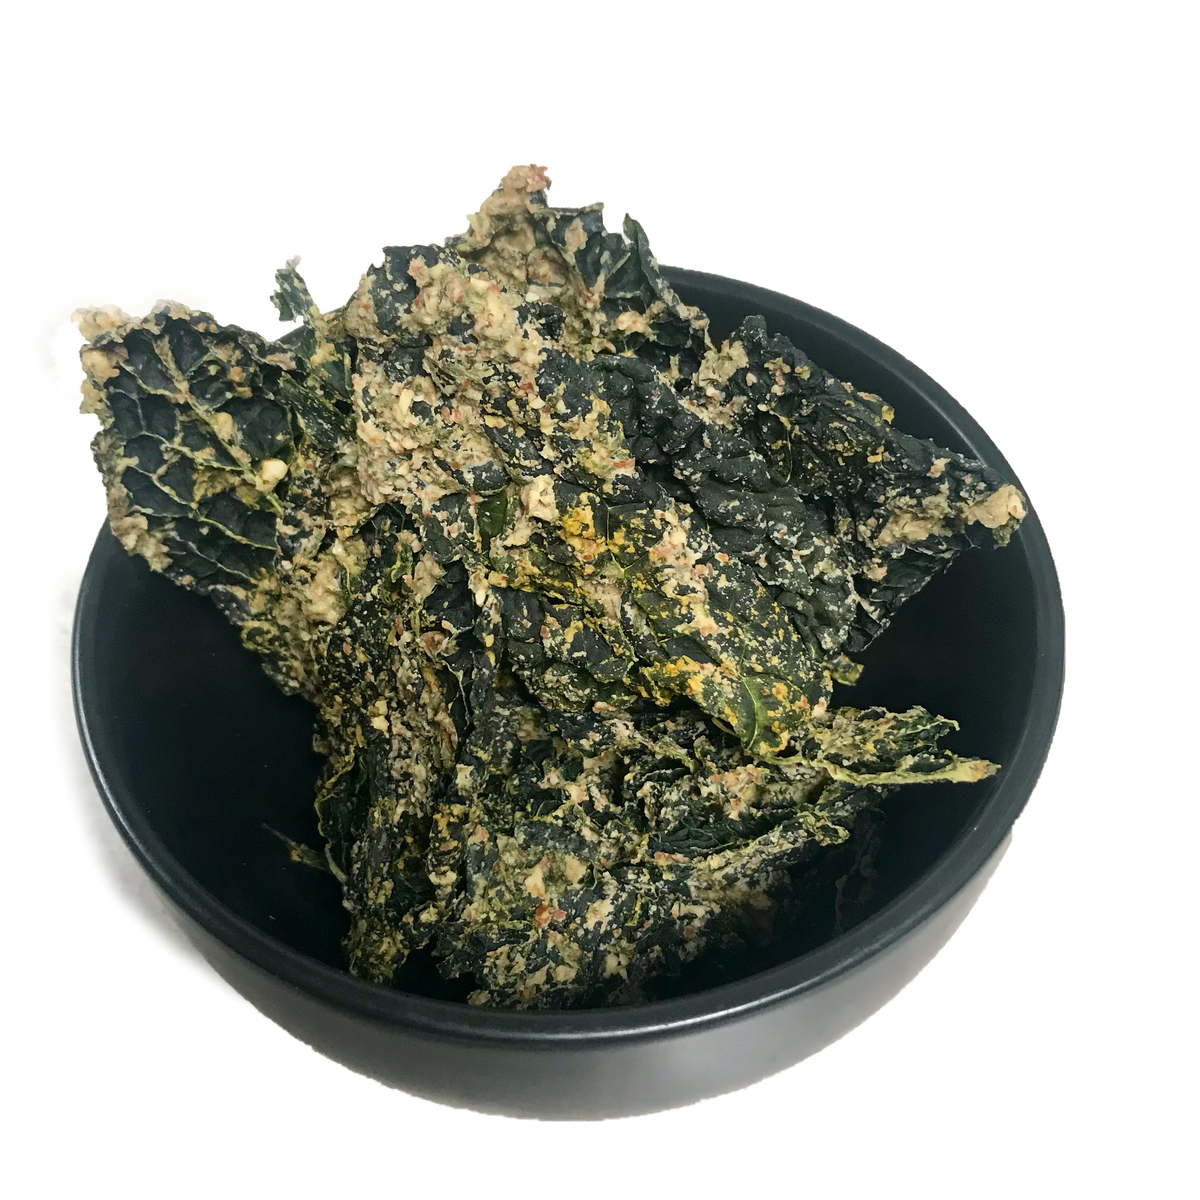 Kale Chips - Sour Cream And Chive